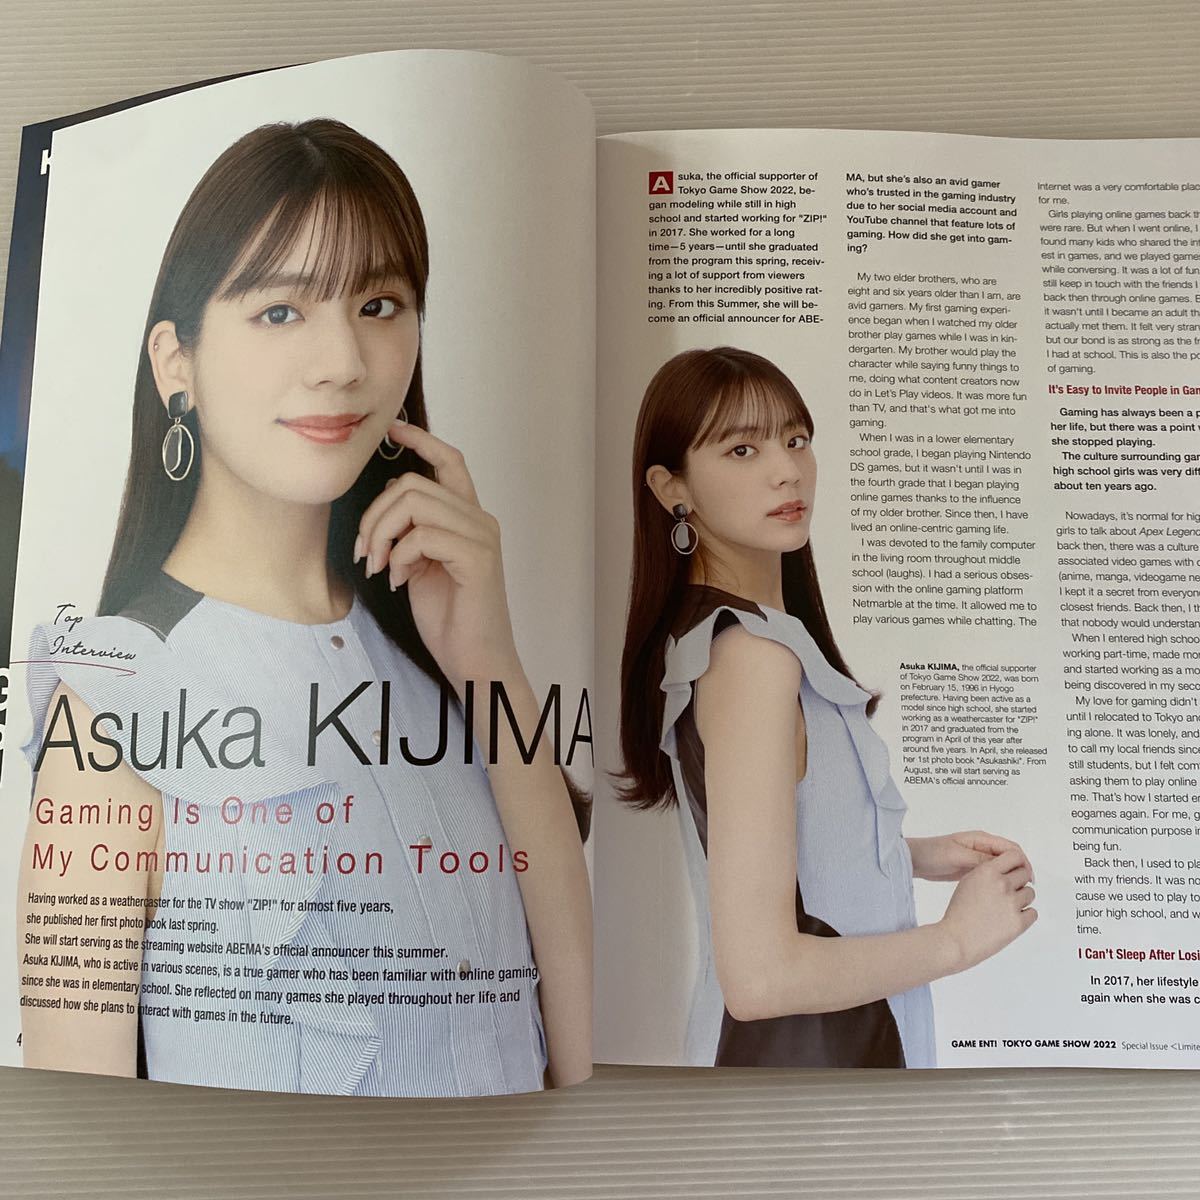 GAME ent! limited edition 2022 TOKYO GAME SHOW ASUKA KIJIMA KEYwords the now of games metaverse blockchain gameplay streaming PC